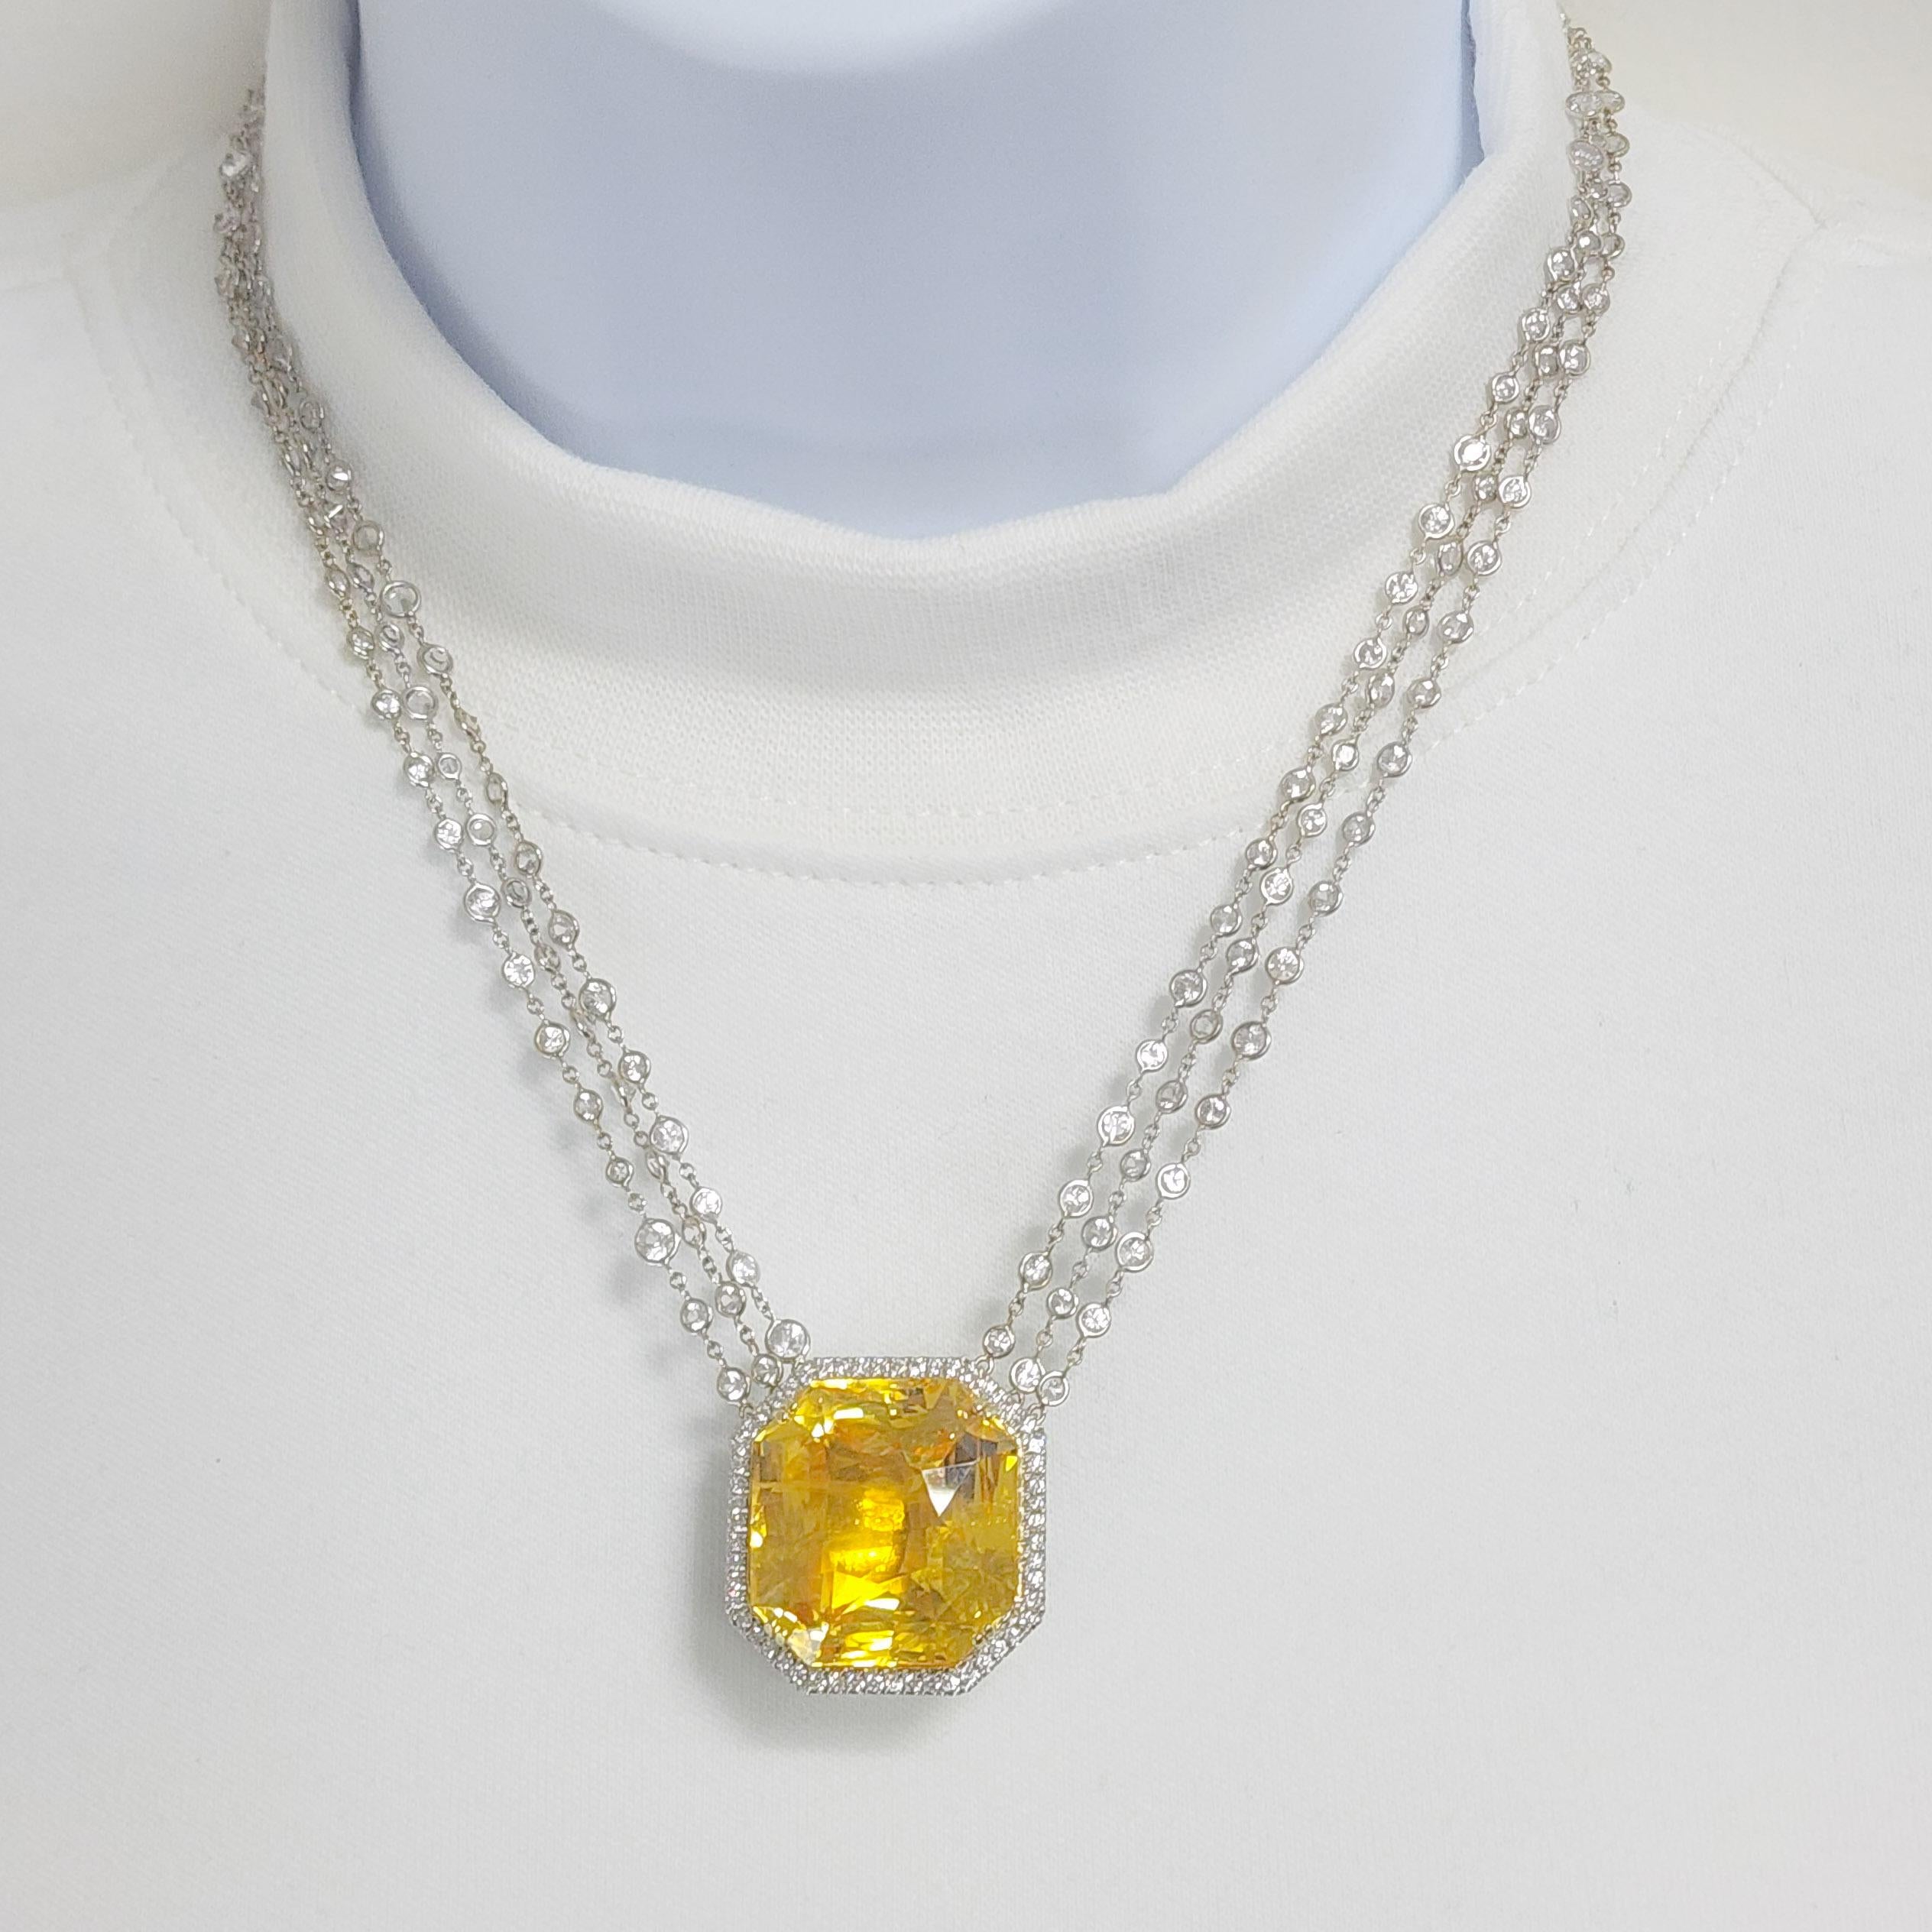 Absolutely spell bounding 80.26 ct. unheated Sri Lanka yellow sapphire octagon with 20.00 ct. good quality white diamond rounds around the stone and white sapphire rounds on the chains.  Handmade in platinum and 18k yellow gold.  This necklace is